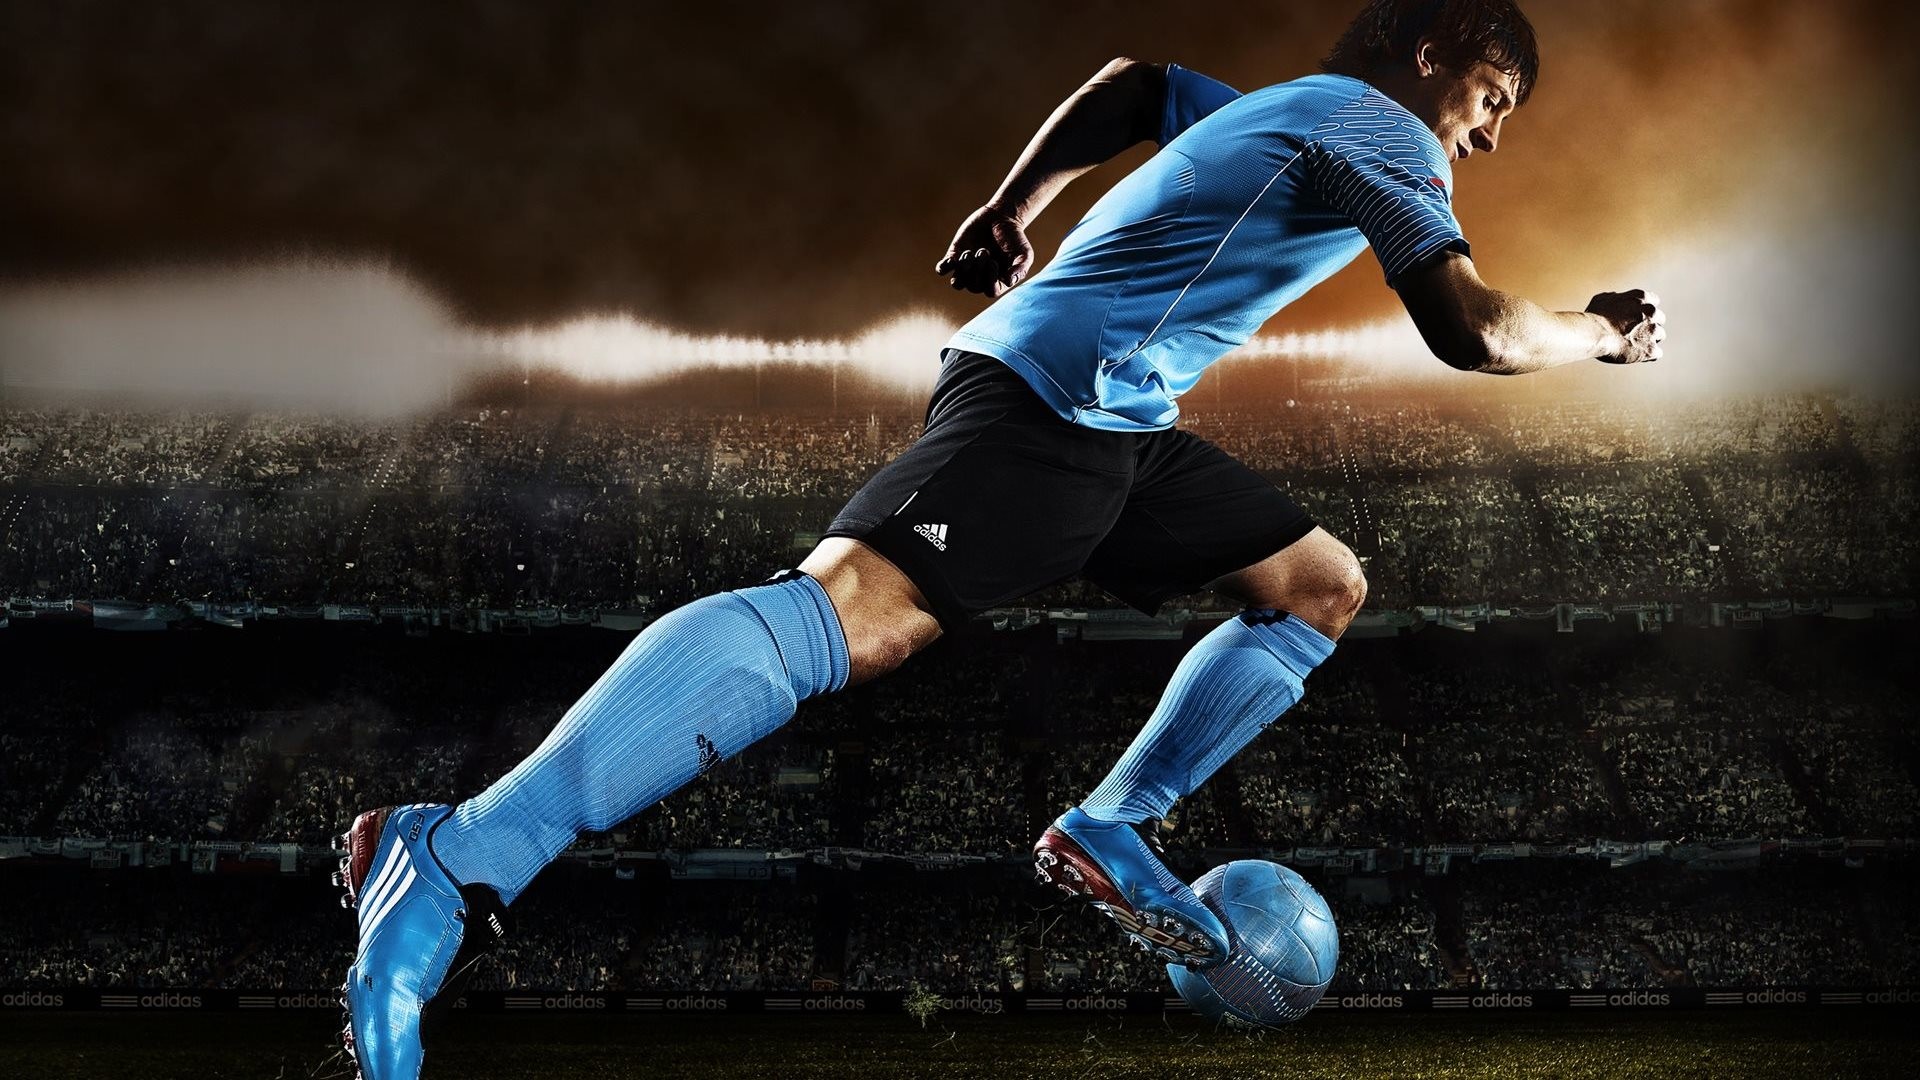 soccer players wallpapers hd, hd football wallpapers